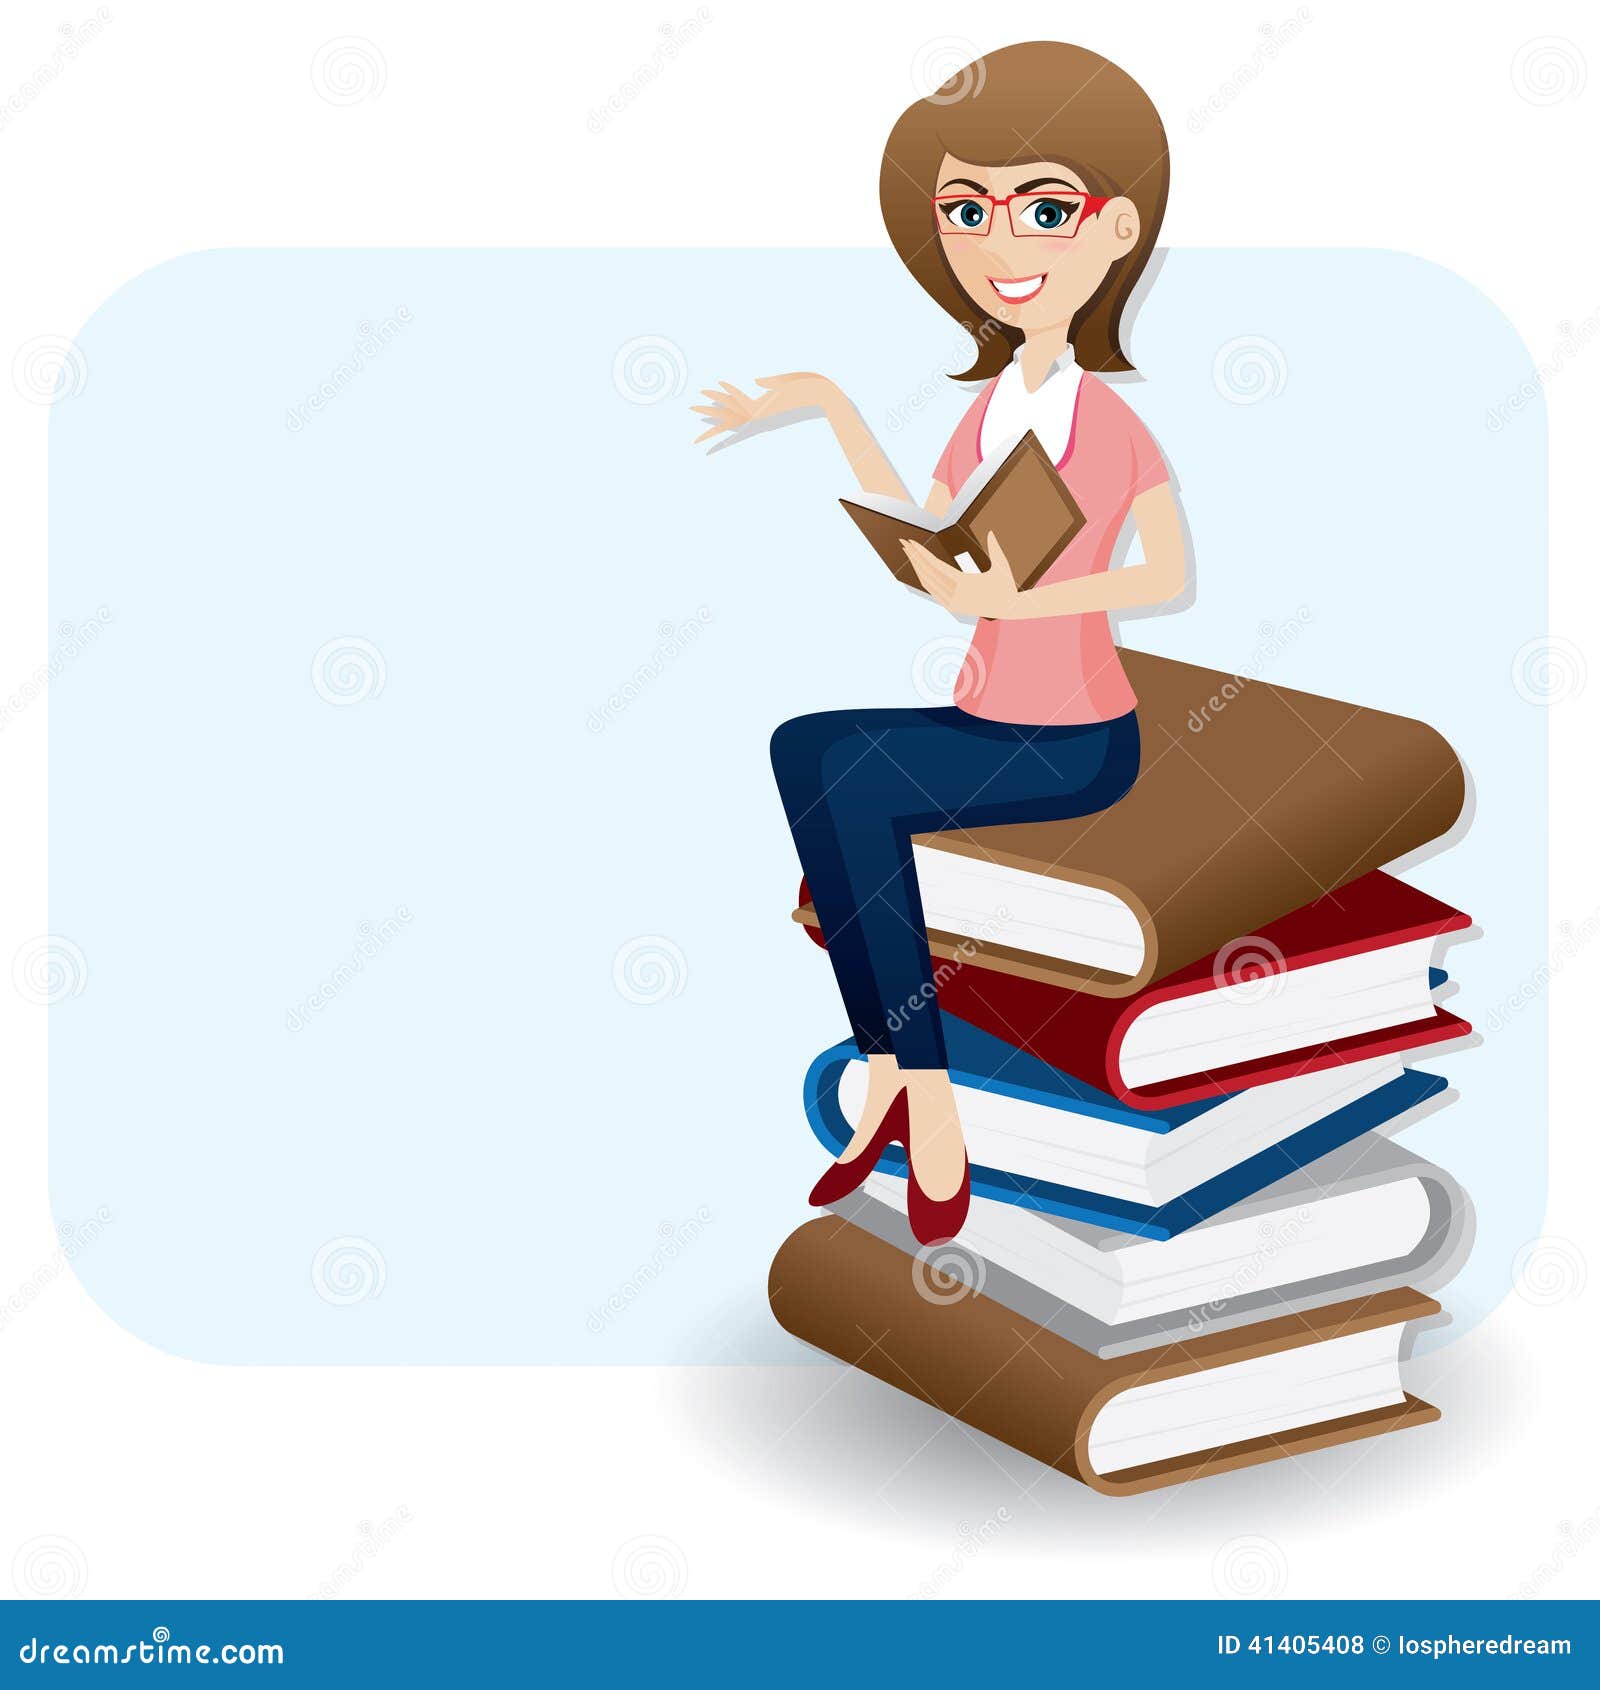 clipart woman reading book - photo #22